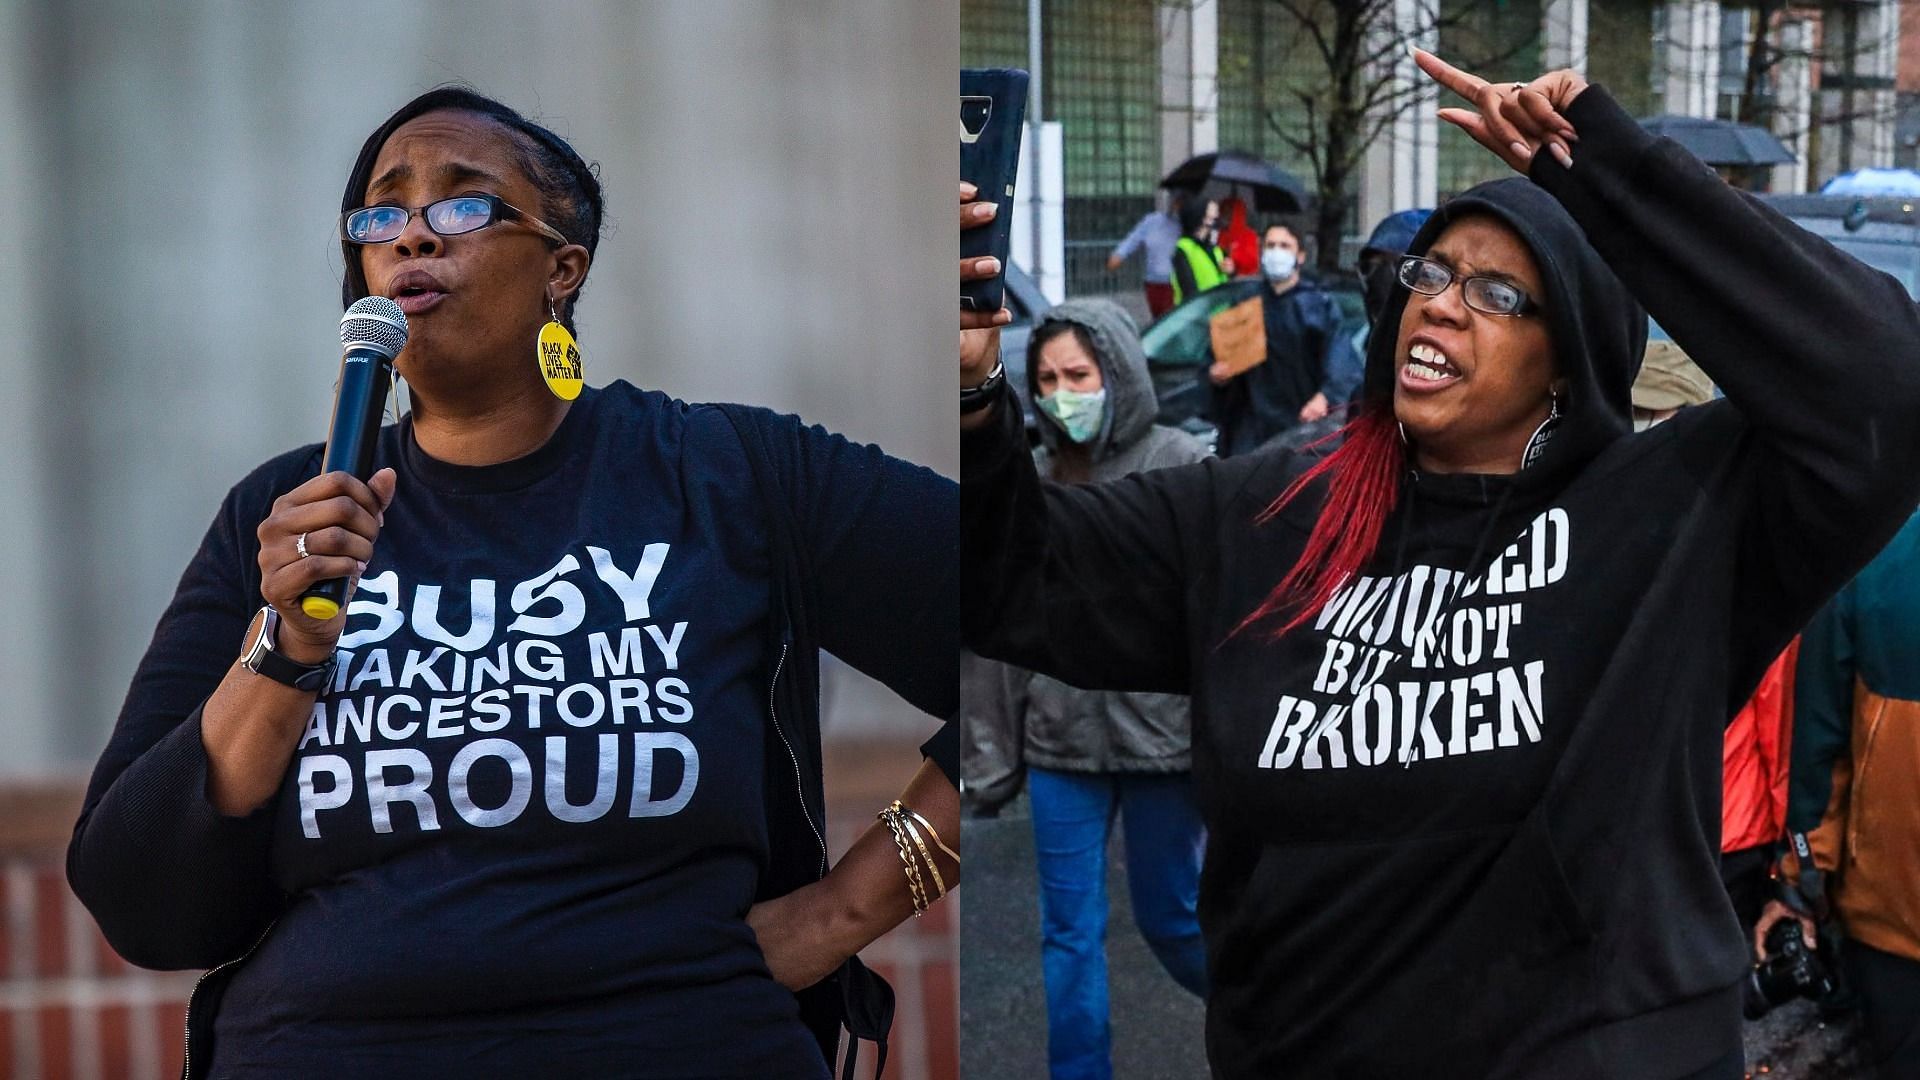 Boston activist Monica Cannon Grant has been indicted on fraud charges (Image via 1AmKa3/Twitter and Erin Clark/Getty Images)